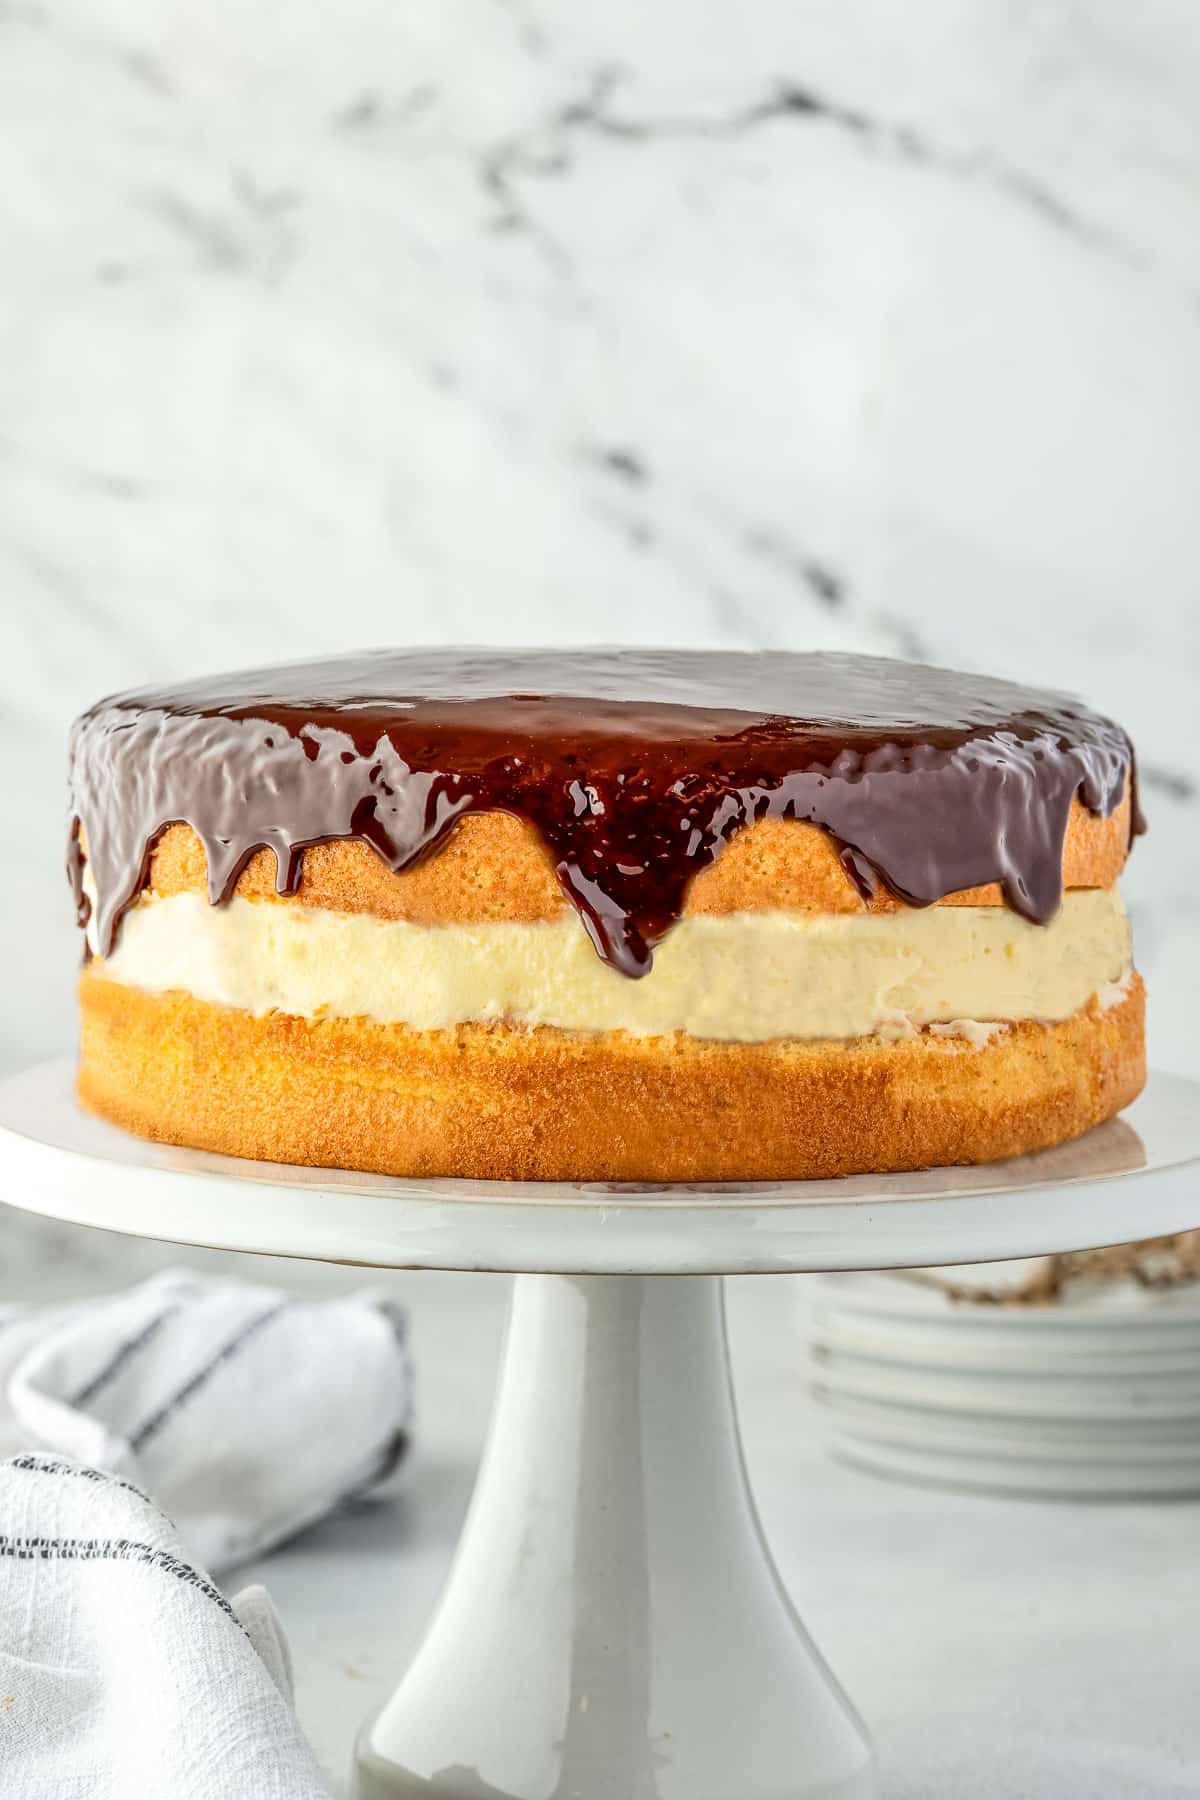 A layered cake on a cake stand, with cream filling and chocolate ganache dripping down the sides.